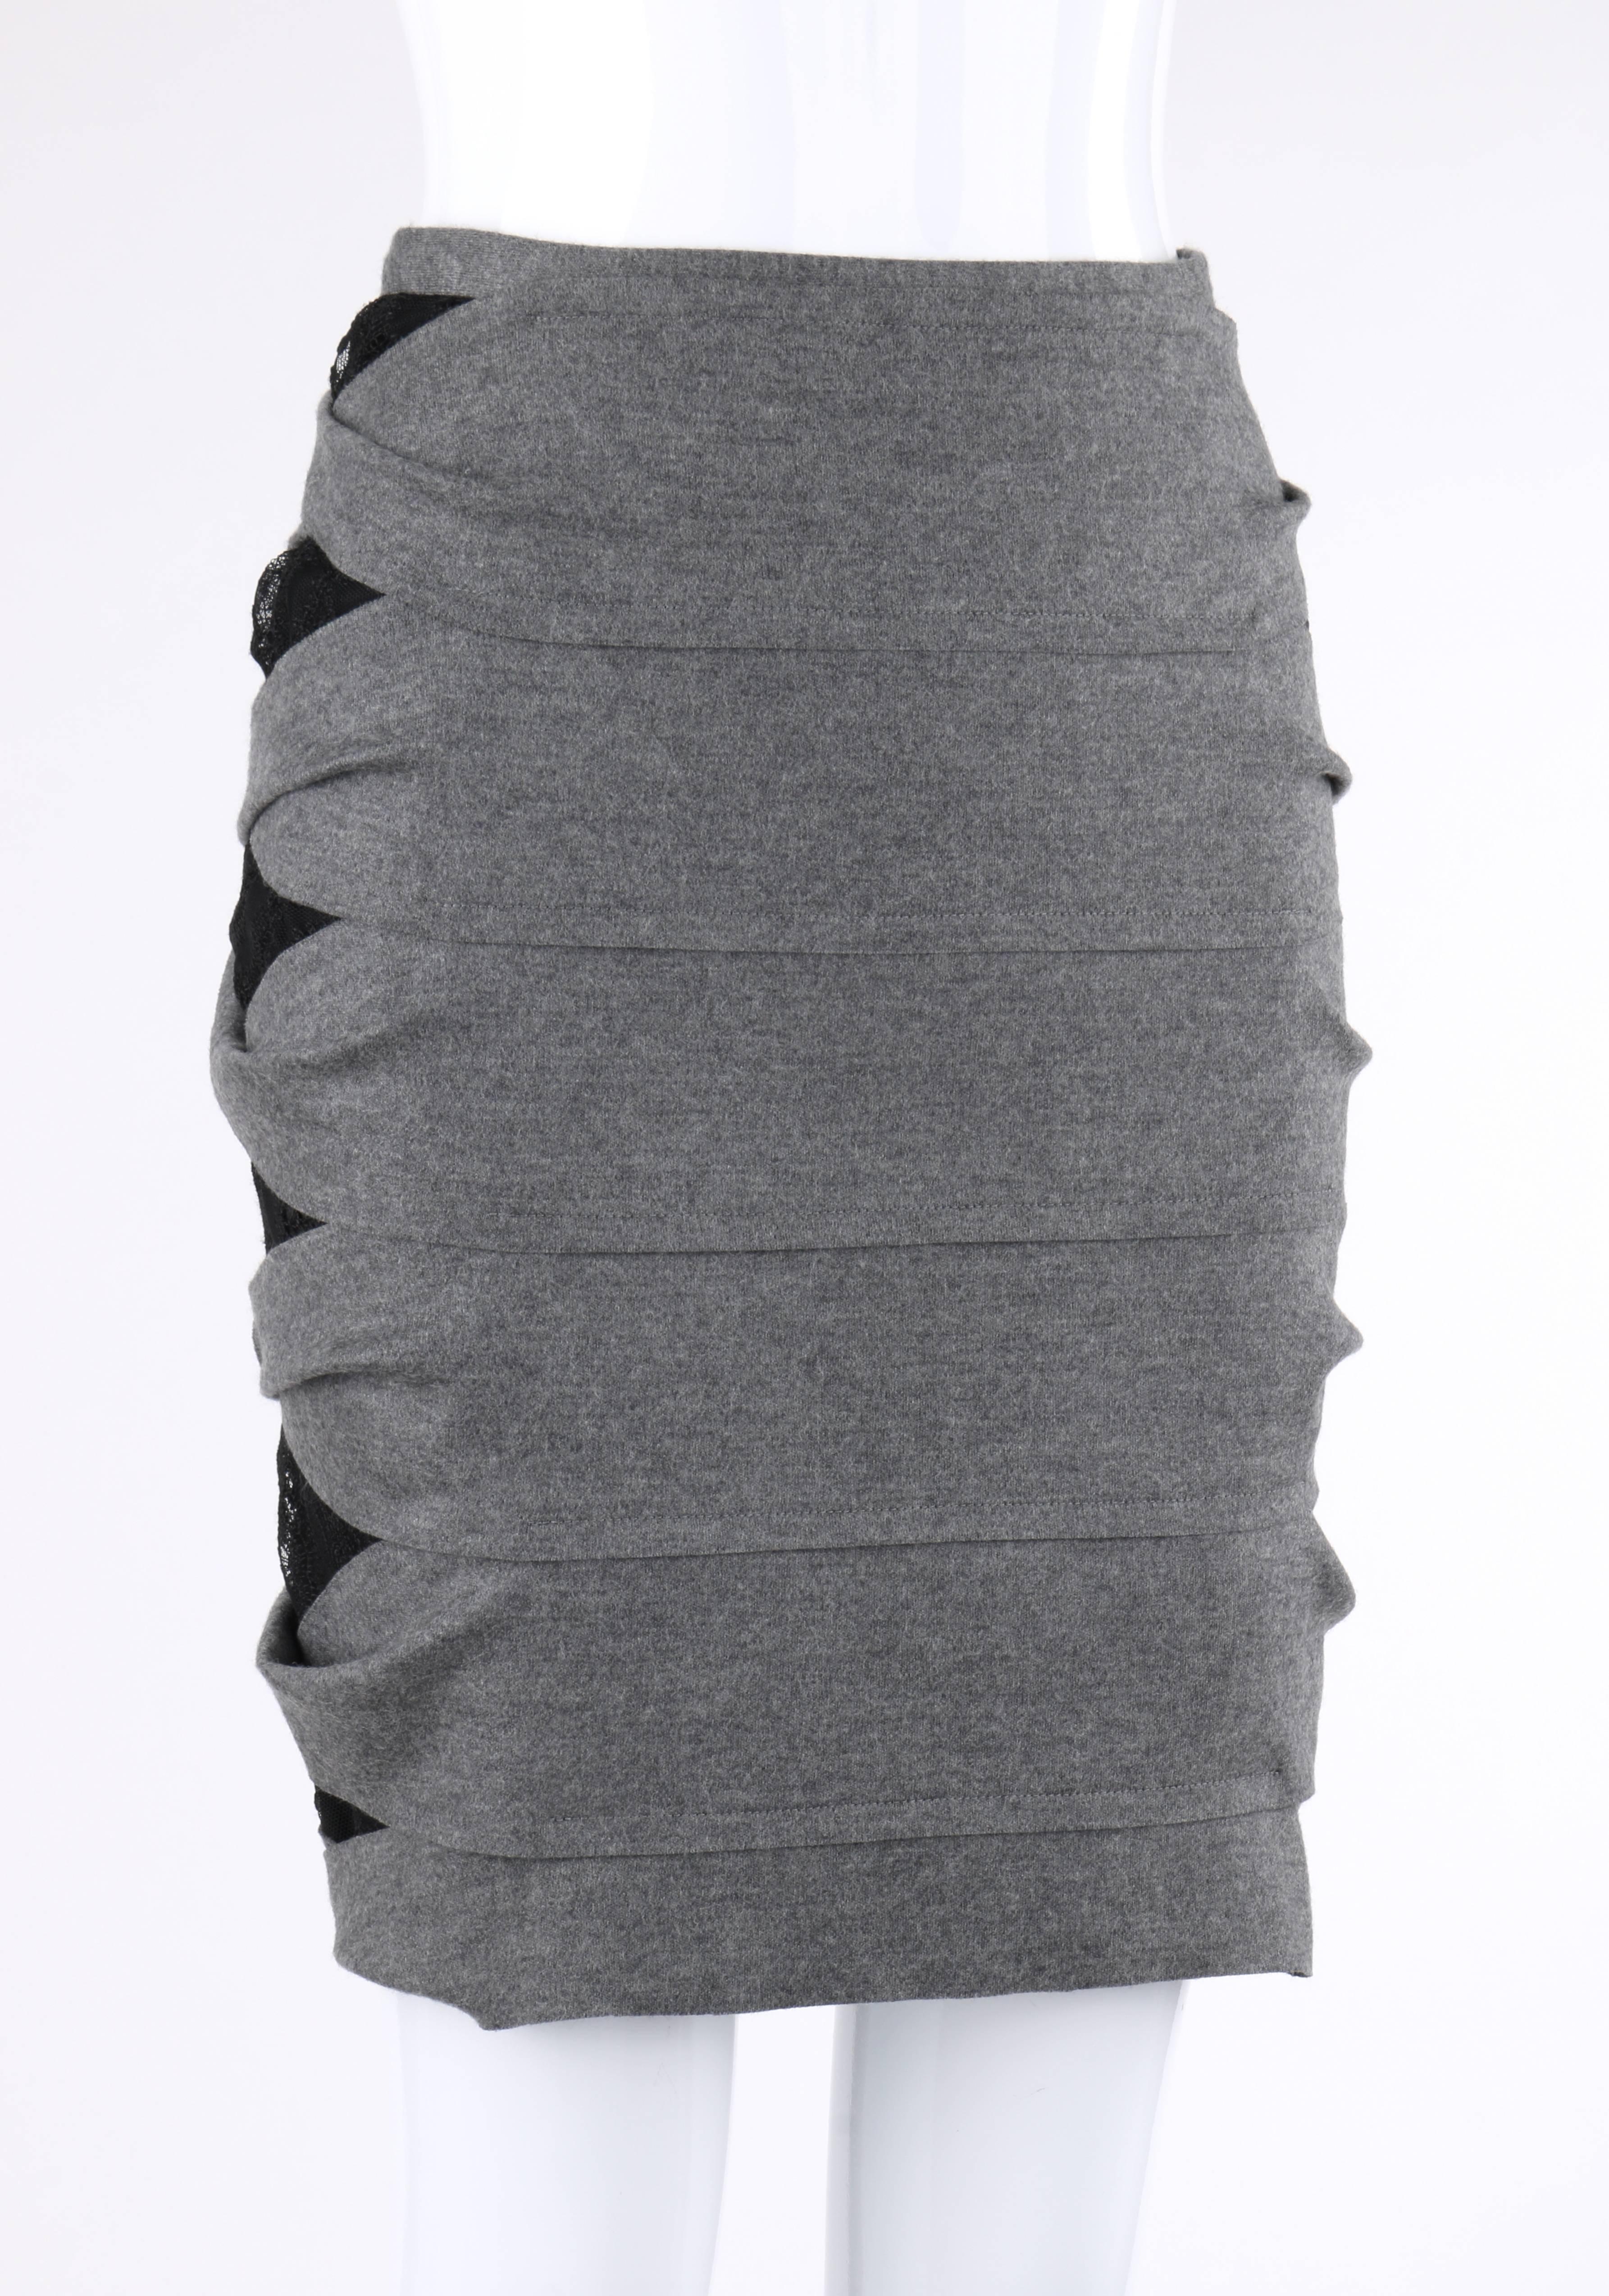 Fendi Pre-Fall 2012 gray wool banded pencil skirt; new without tags. Runway look #6. Six tiered bands with twist detail at side seams. Black floral lace underlaid side seam panels. Raw edge detail. Center back invisible zipper with hook and bar